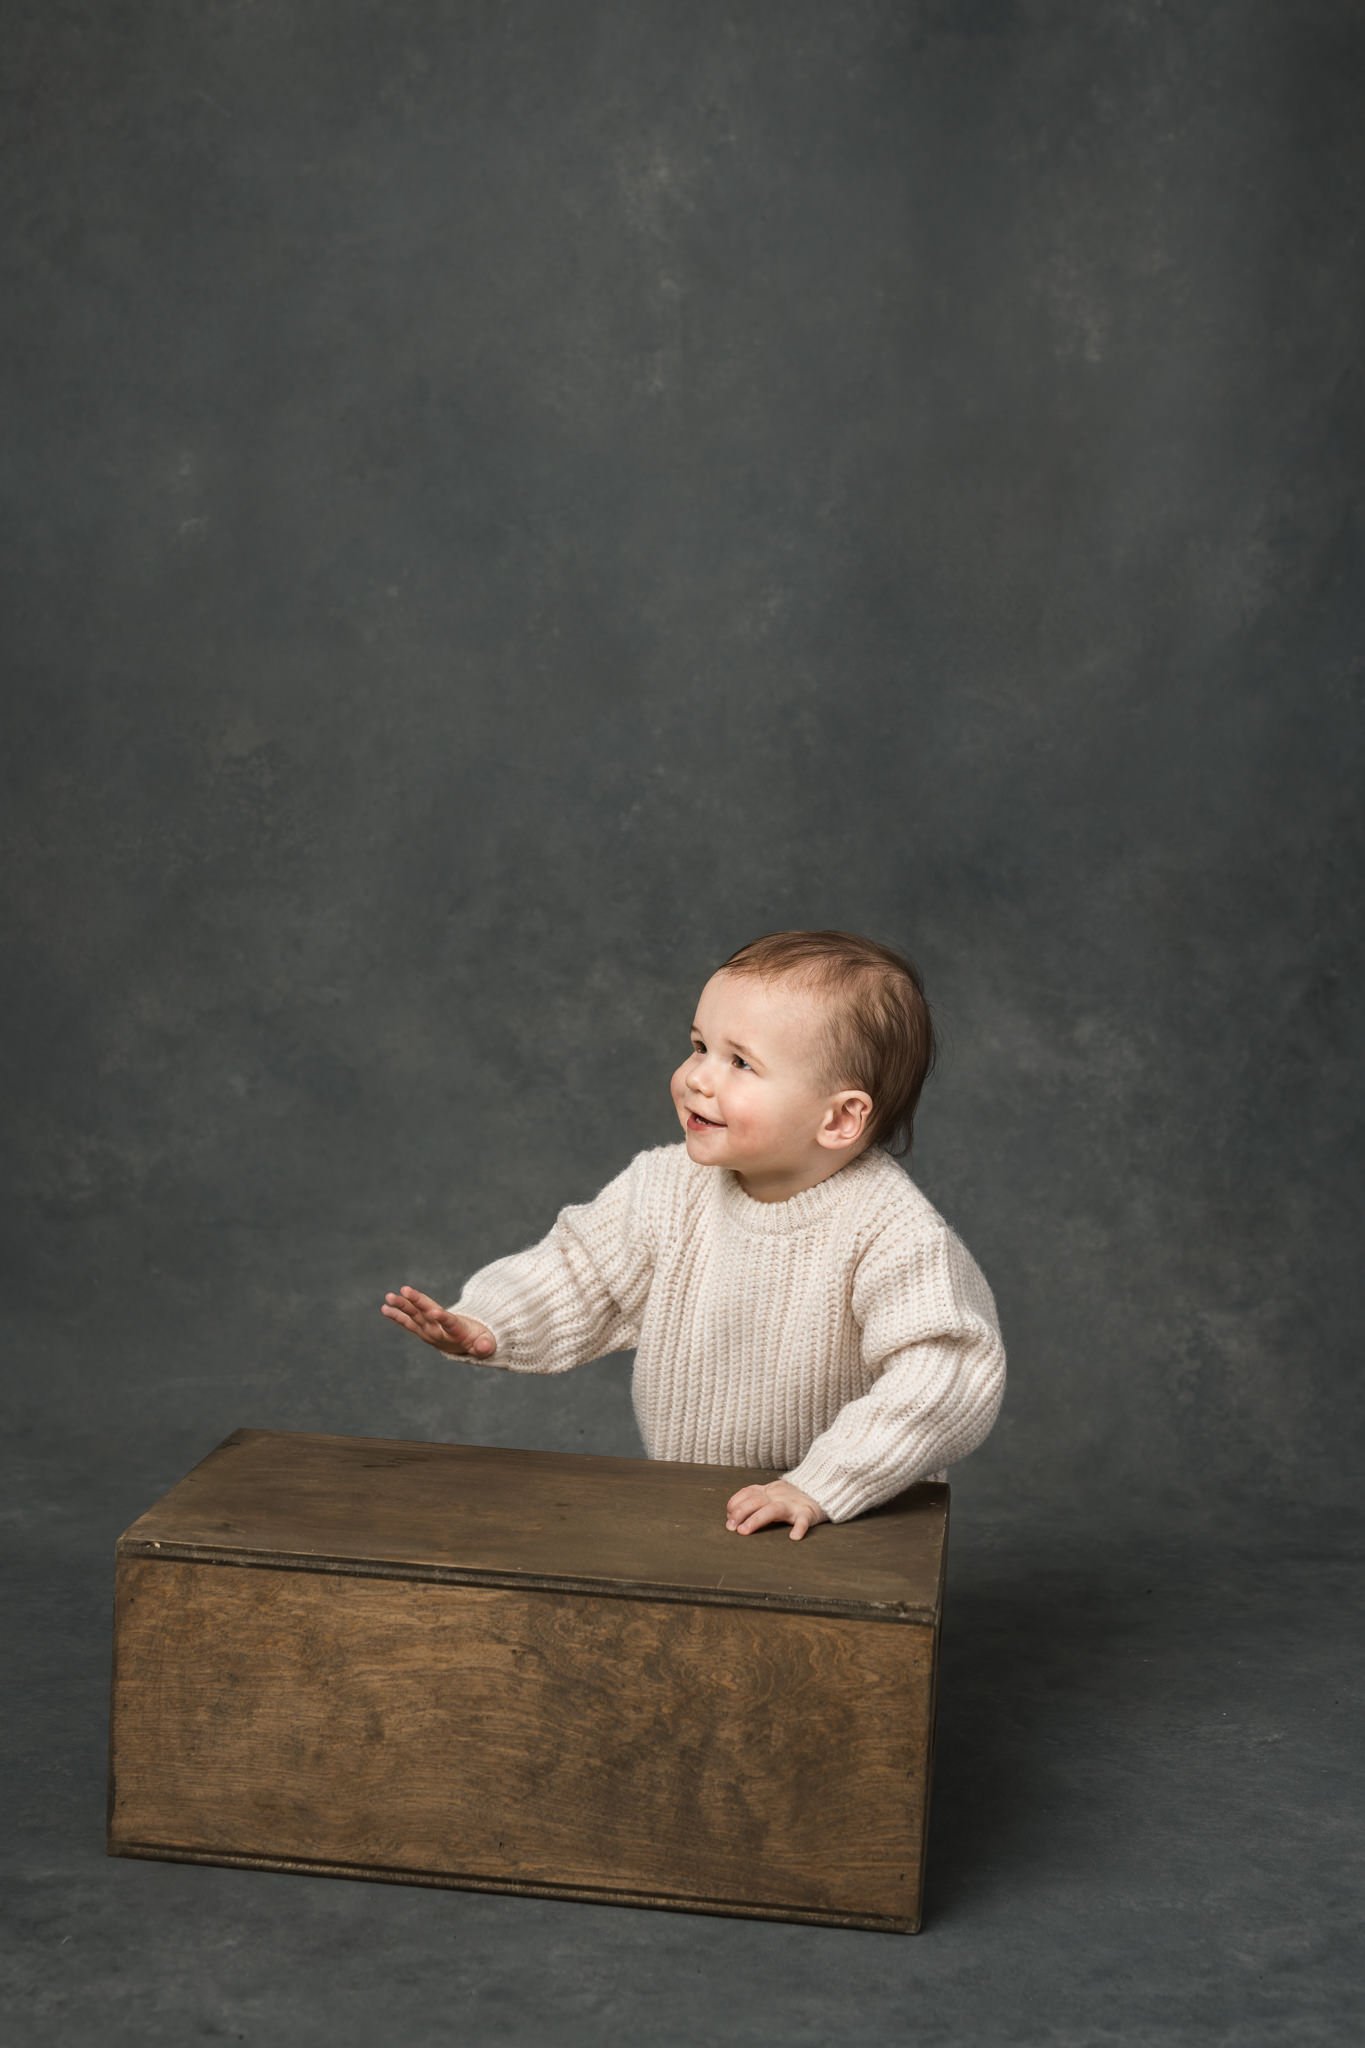  One-year-old baby boy takes portraits at a studio with a black background with Nicole Hawkins PHotogrpahy in Northern NJ. one year old portraits studio baby portraits #NicoleHawkinsPhotography #NicoleHawkinsBabies #FirstBirthdayPhotography #StudioFa